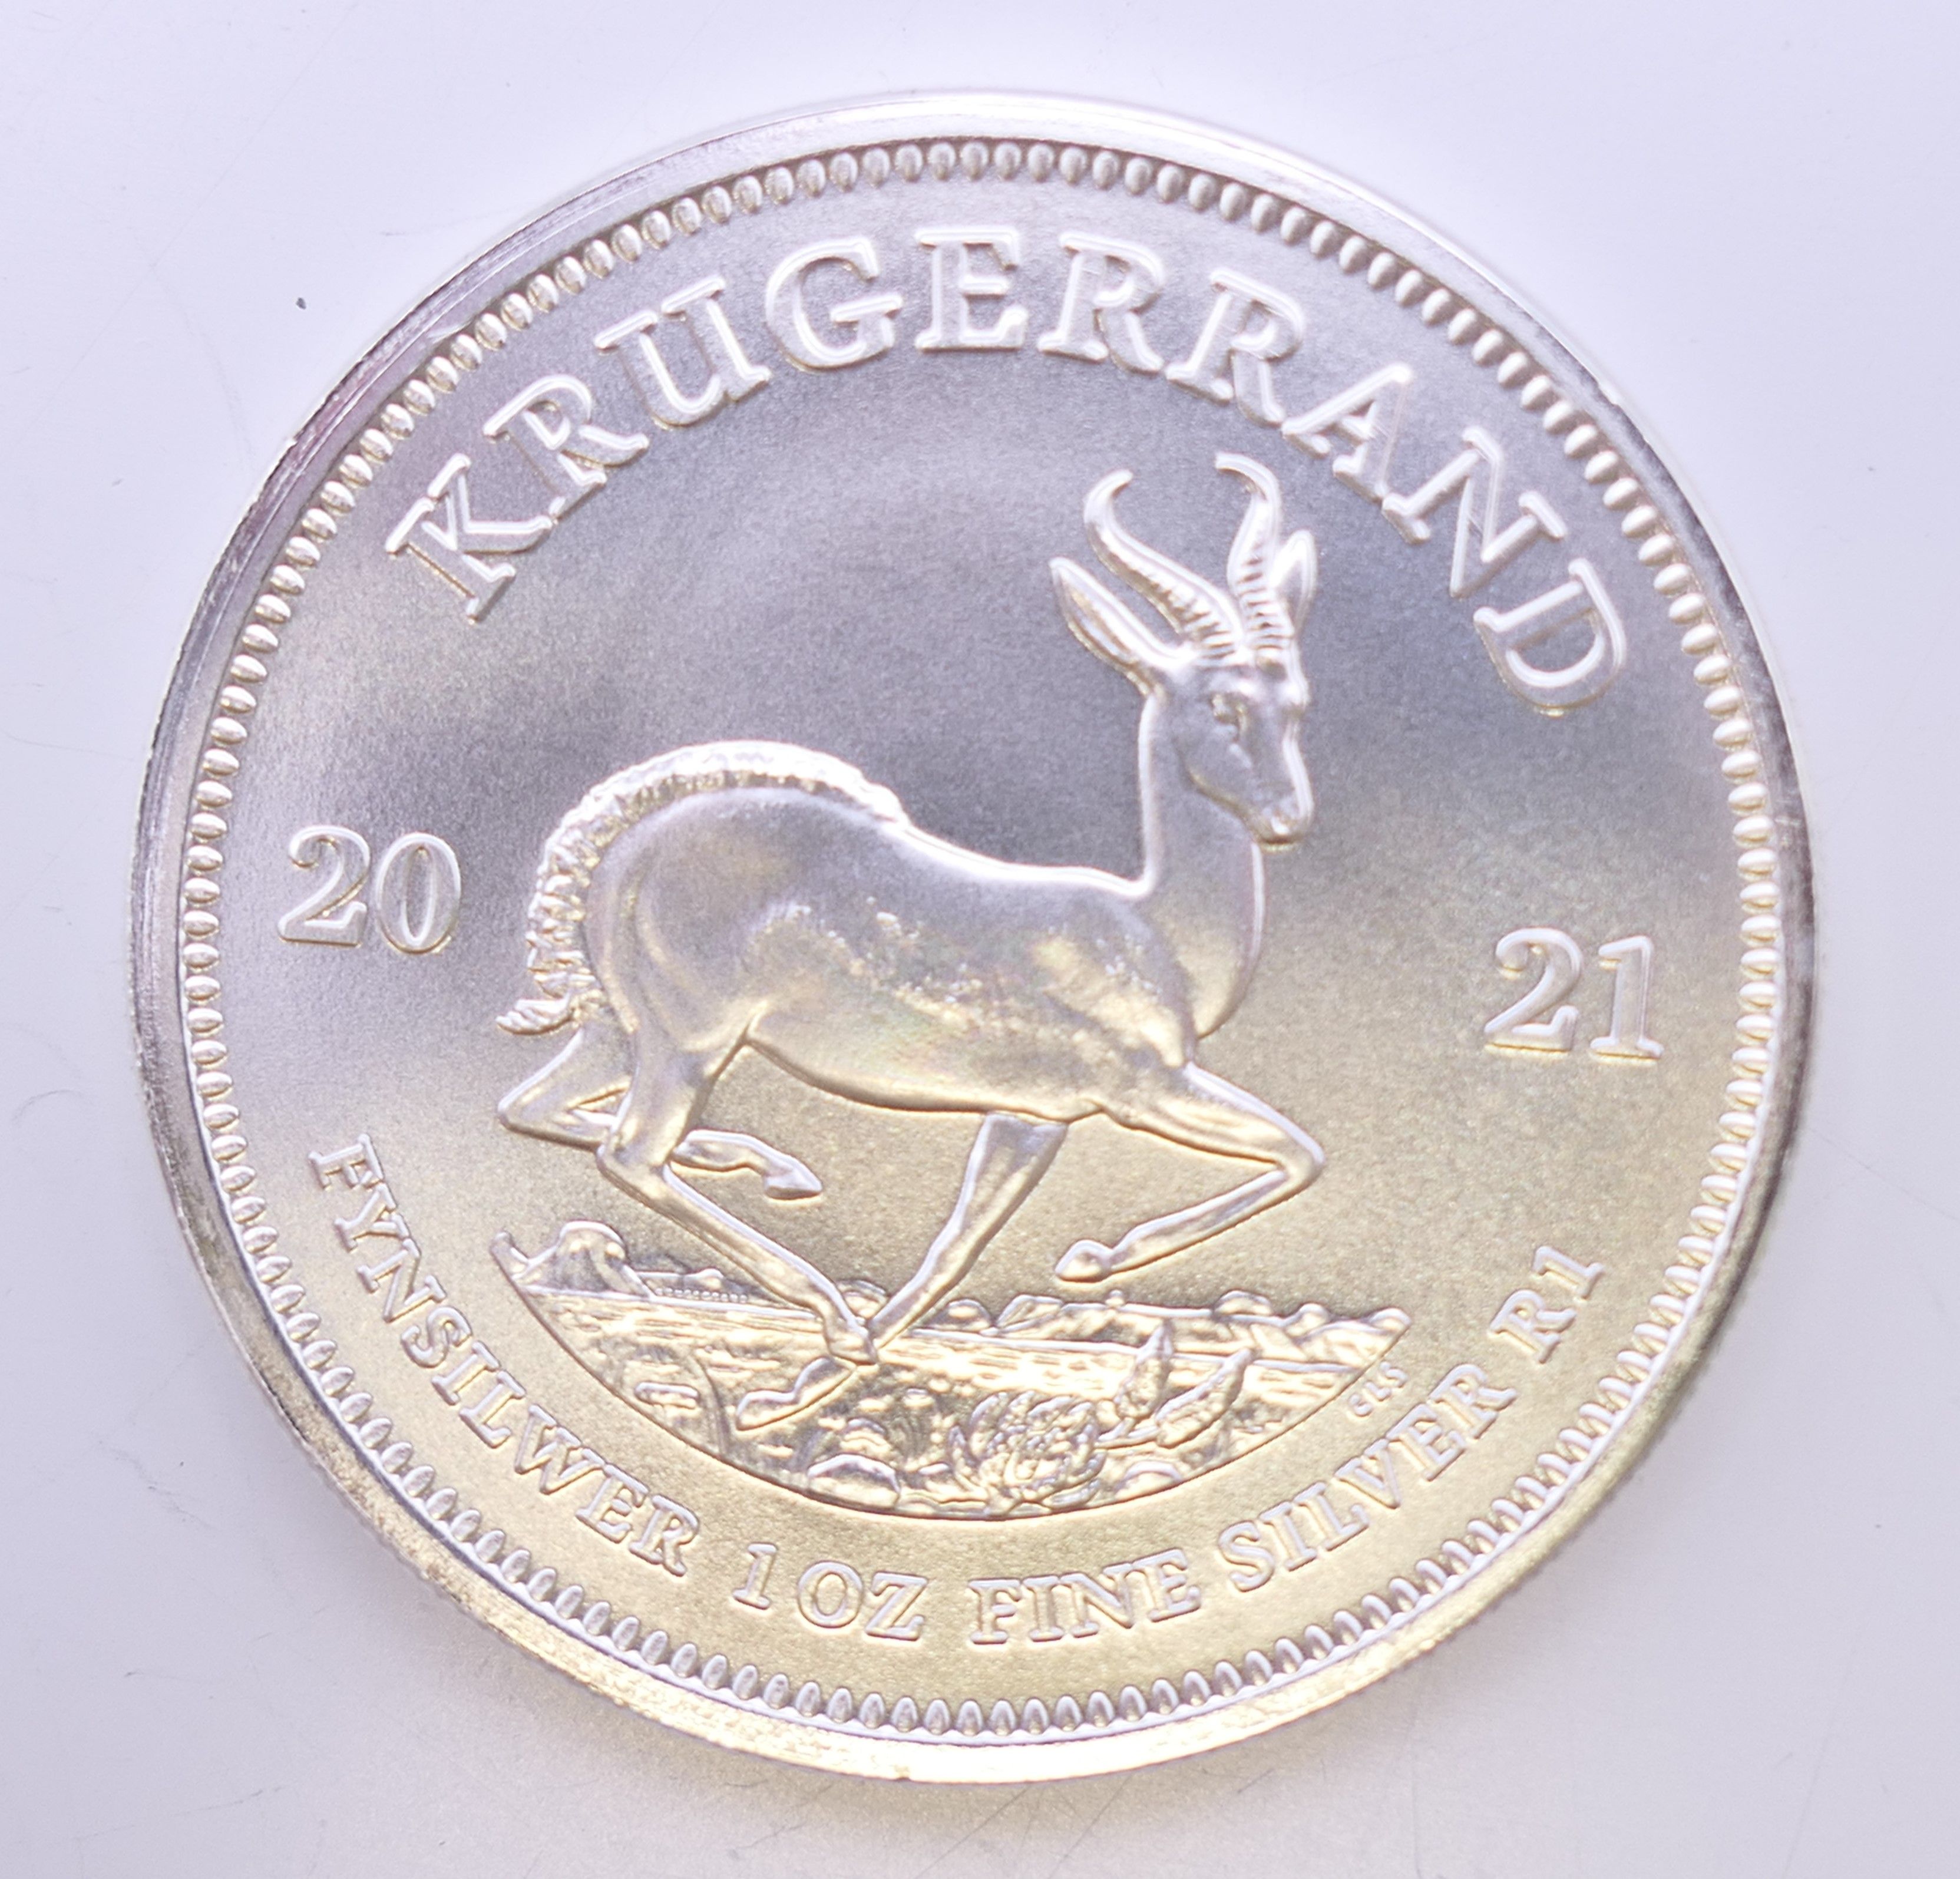 A 1 ounce fine silver krugerrand coin. - Image 2 of 2